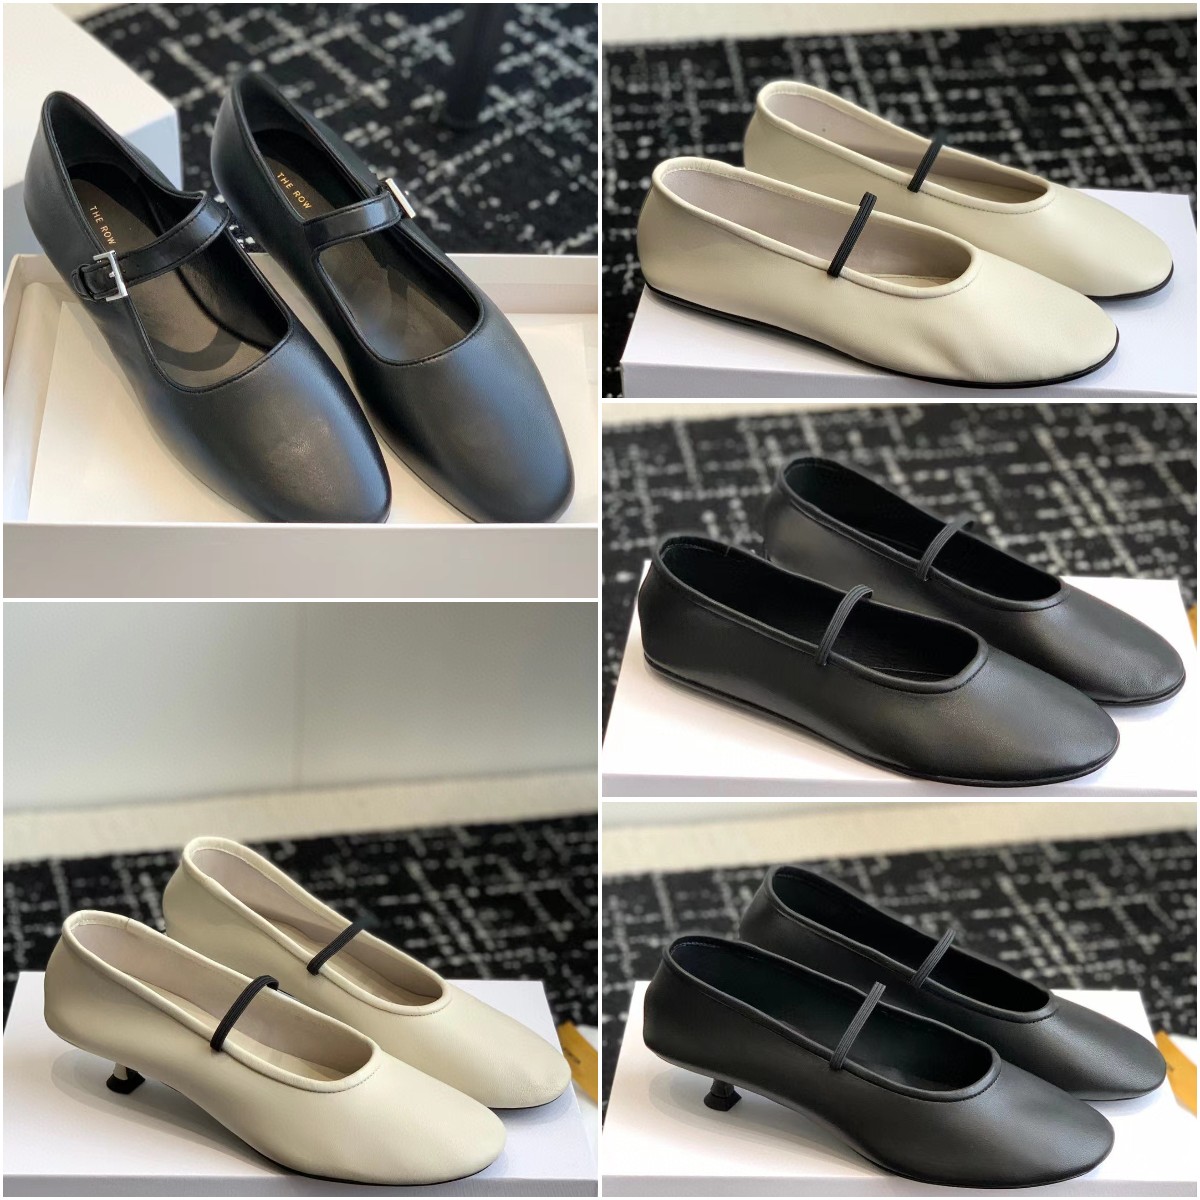 

The Row Ava leather Ballet Flat Shoes Designer Women Fashion leisure Ava Ballet Shoes Sheepskin Canal Retro High quality Soft Ballet Shoes Size 35-40, Color5